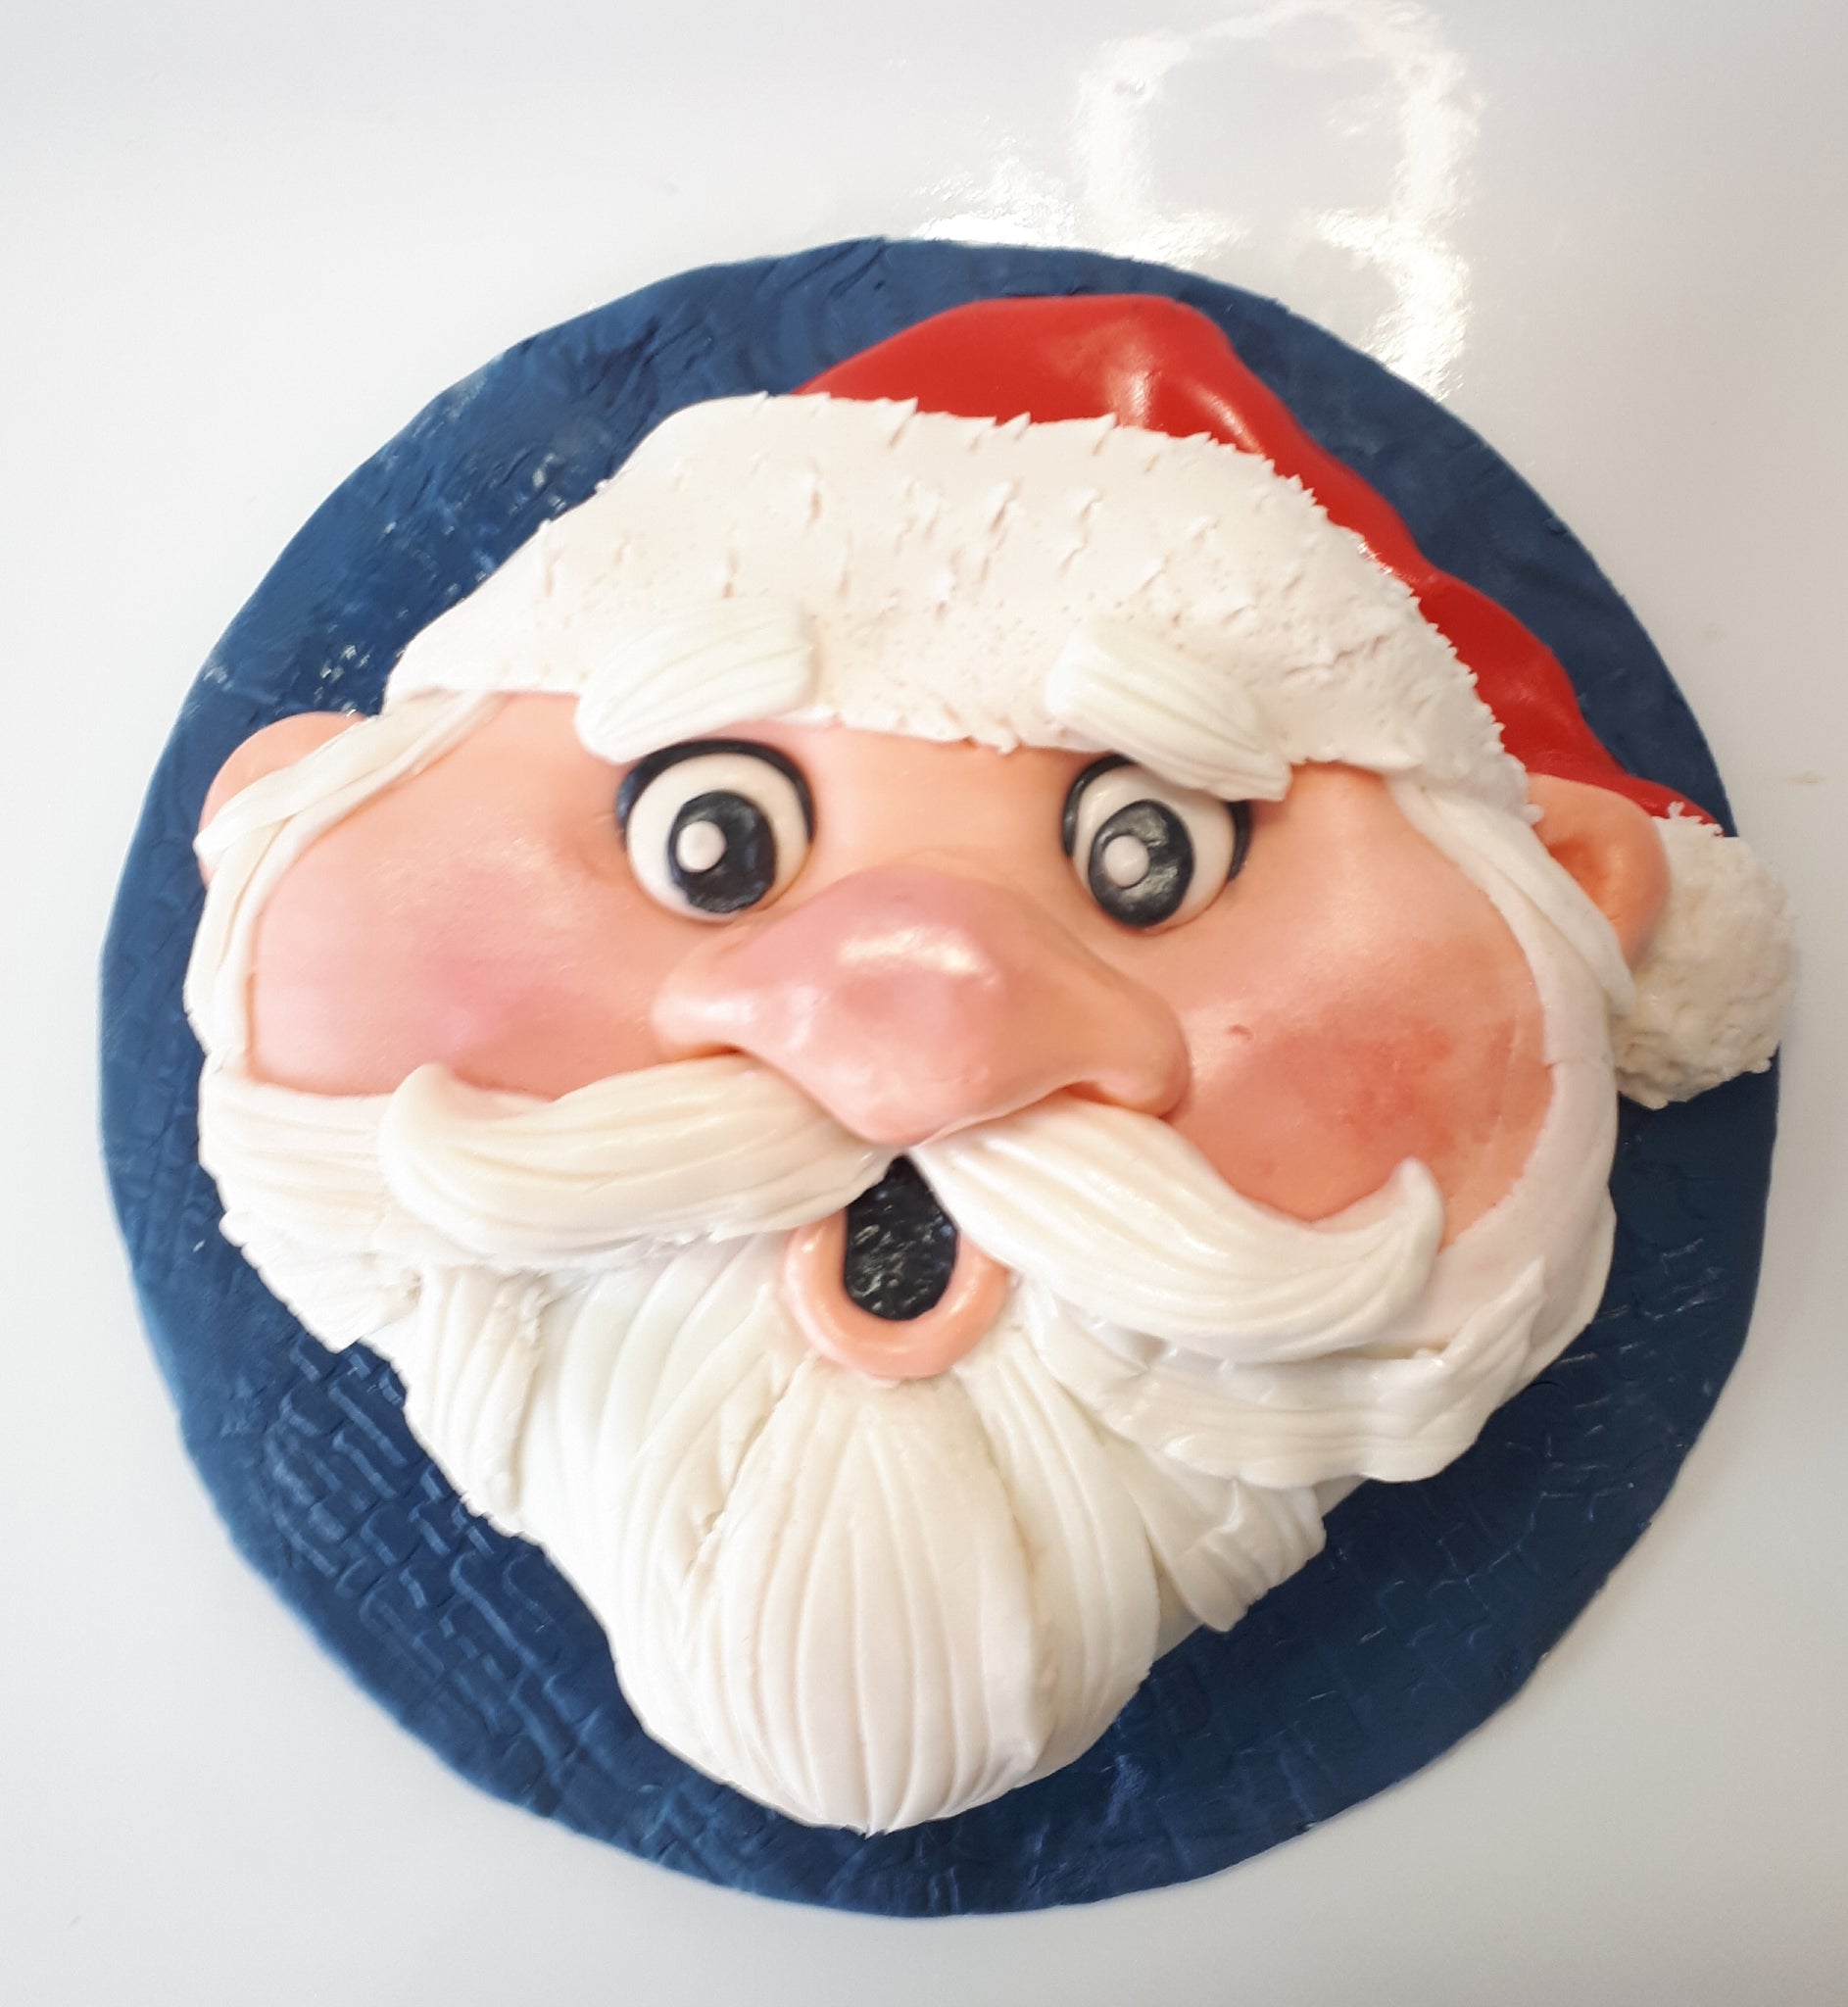 Father Christmas & Gold Merry Christmas cake decoration | The Olde Christmas  Shoppe